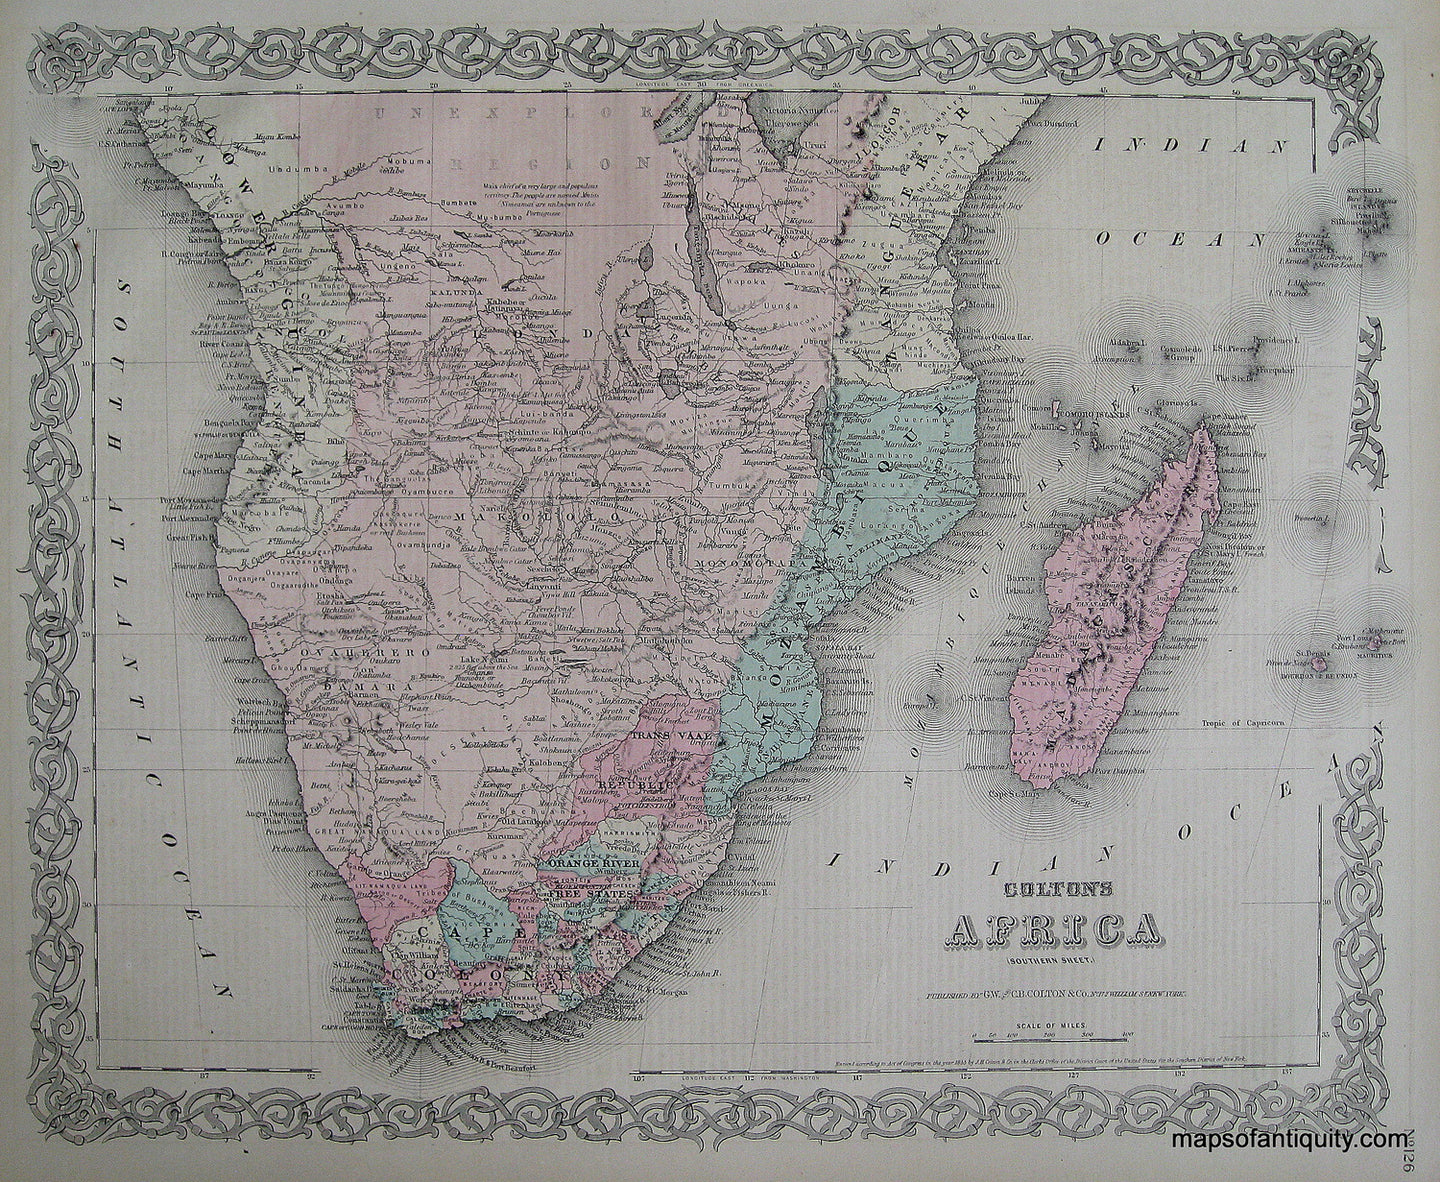 Antique-Hand-Colored-Map-Colton's-Africa-(Southern-Sheet)--******-Africa-Southern-Africa-1871-Colton-Maps-Of-Antiquity